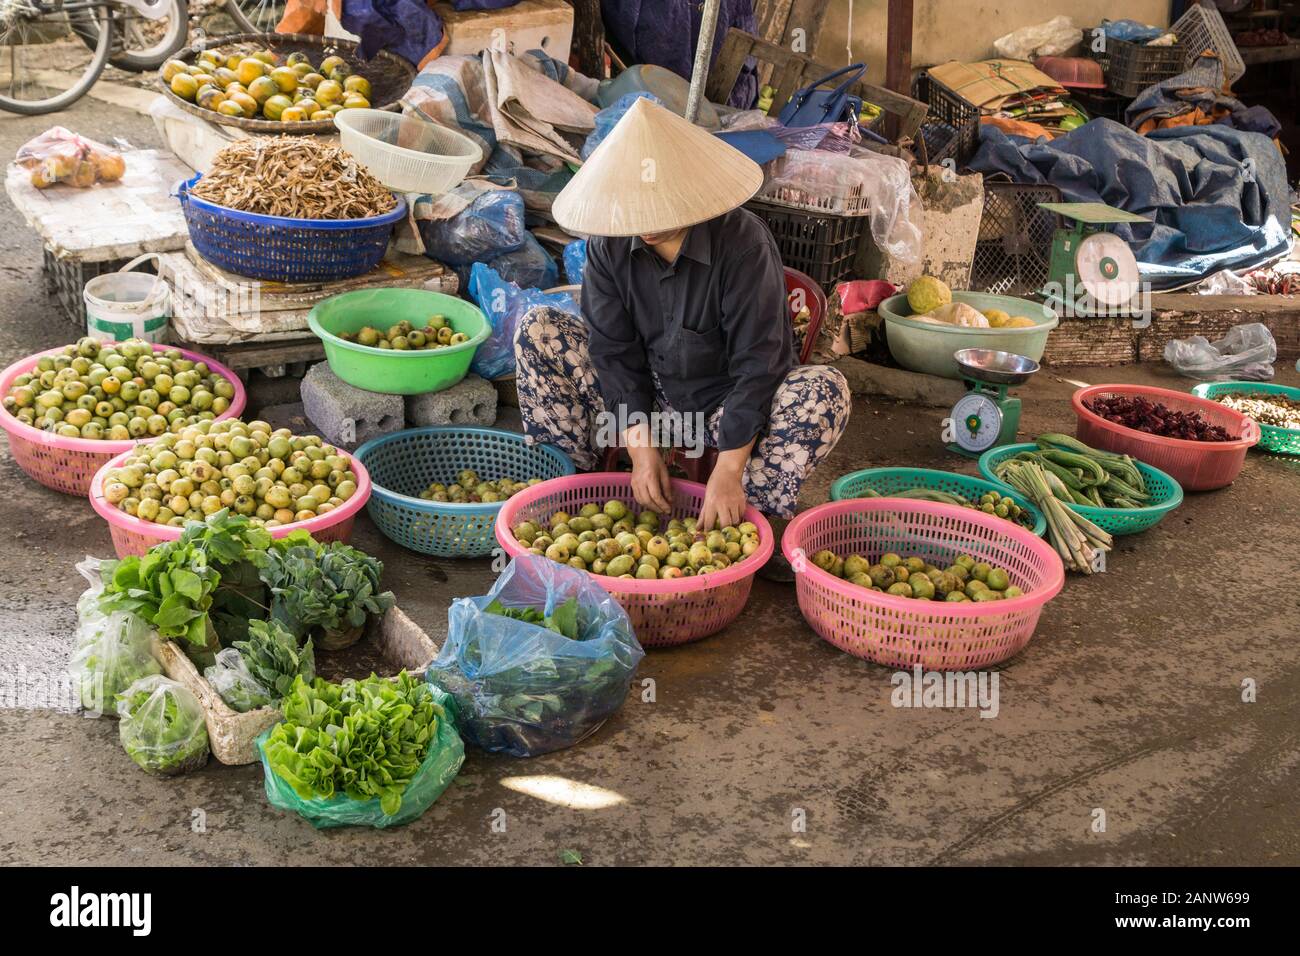 A vietnamese lady sitting on a street corner selling her fresh fruit and greens. Photo taken in Lai Chau, Vietnam Stock Photo